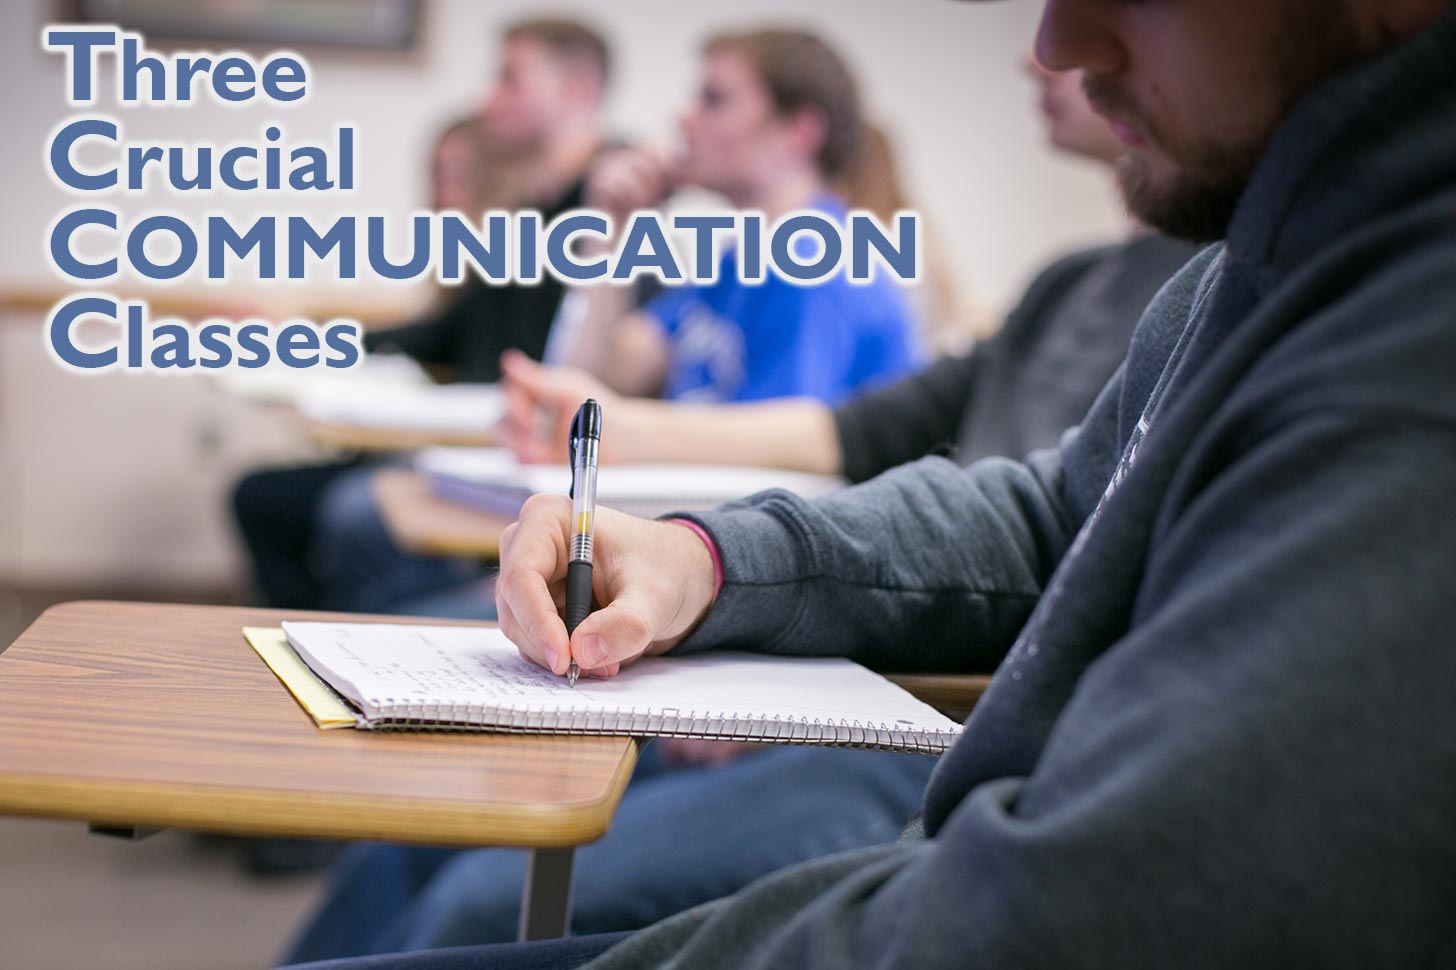 Image of Three Crucial Communication Classes